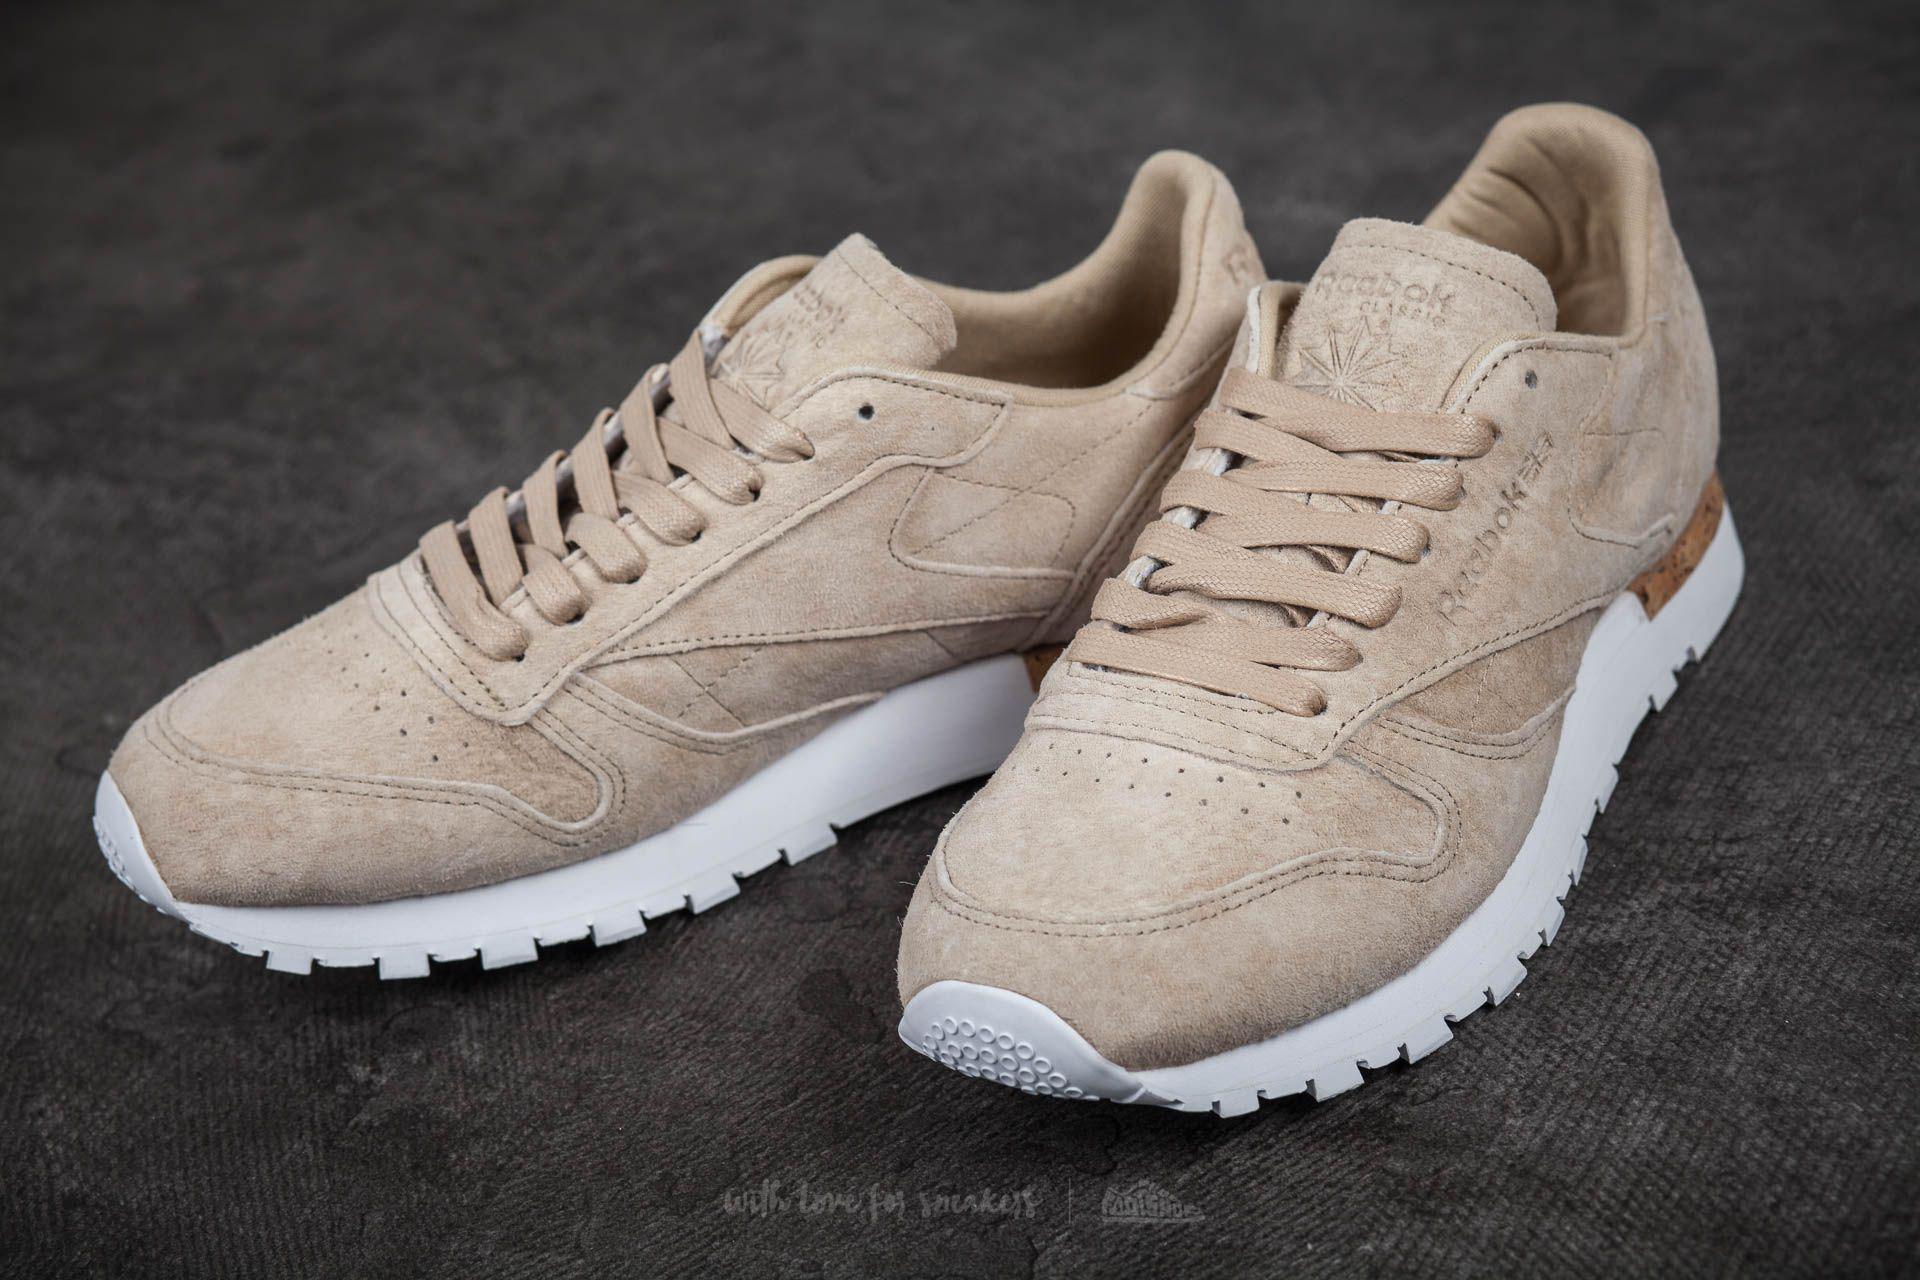 Reebok Classic Leather Lst Oatmeal/ Driftwood/ White | Lyst